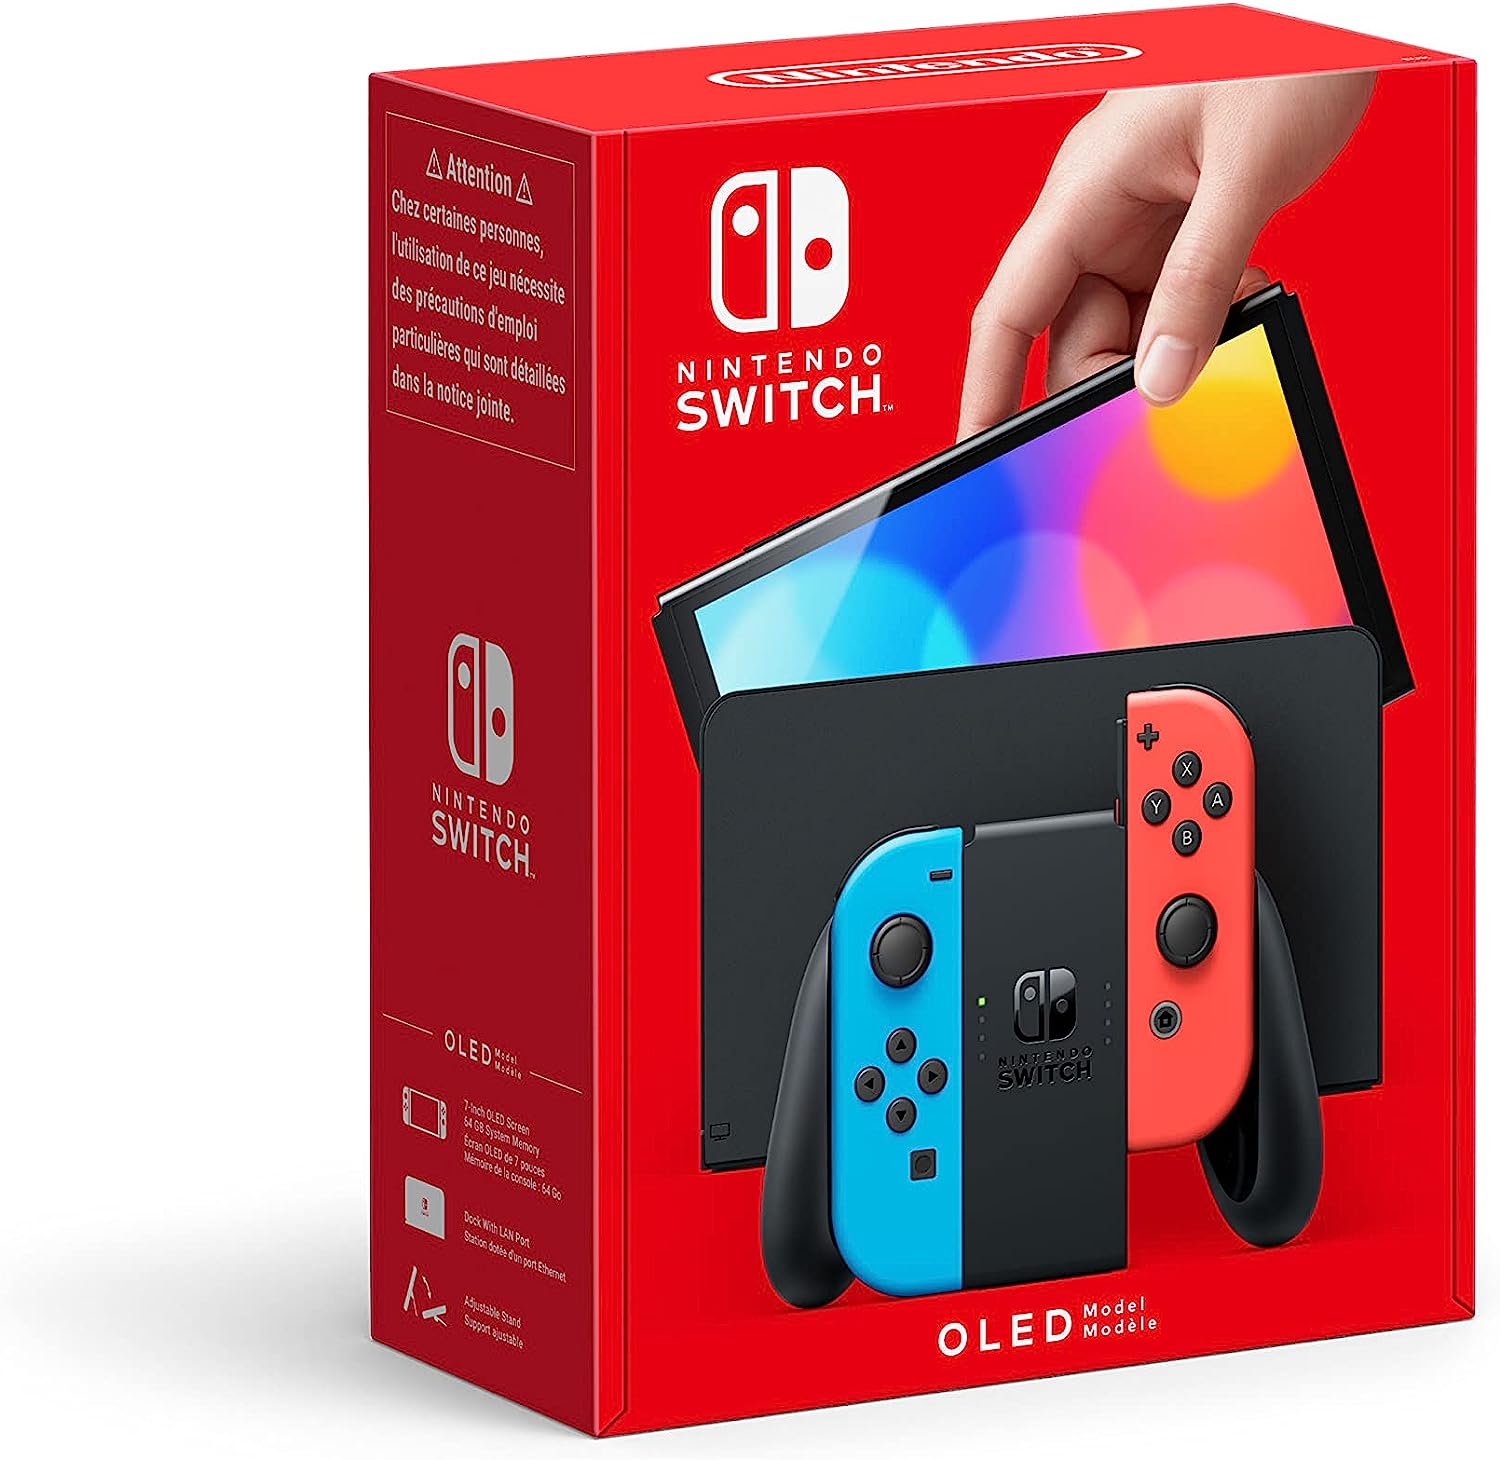 Nintendo Switch OLED Display Handheld Gaming Console with Controllers and Dock - 7